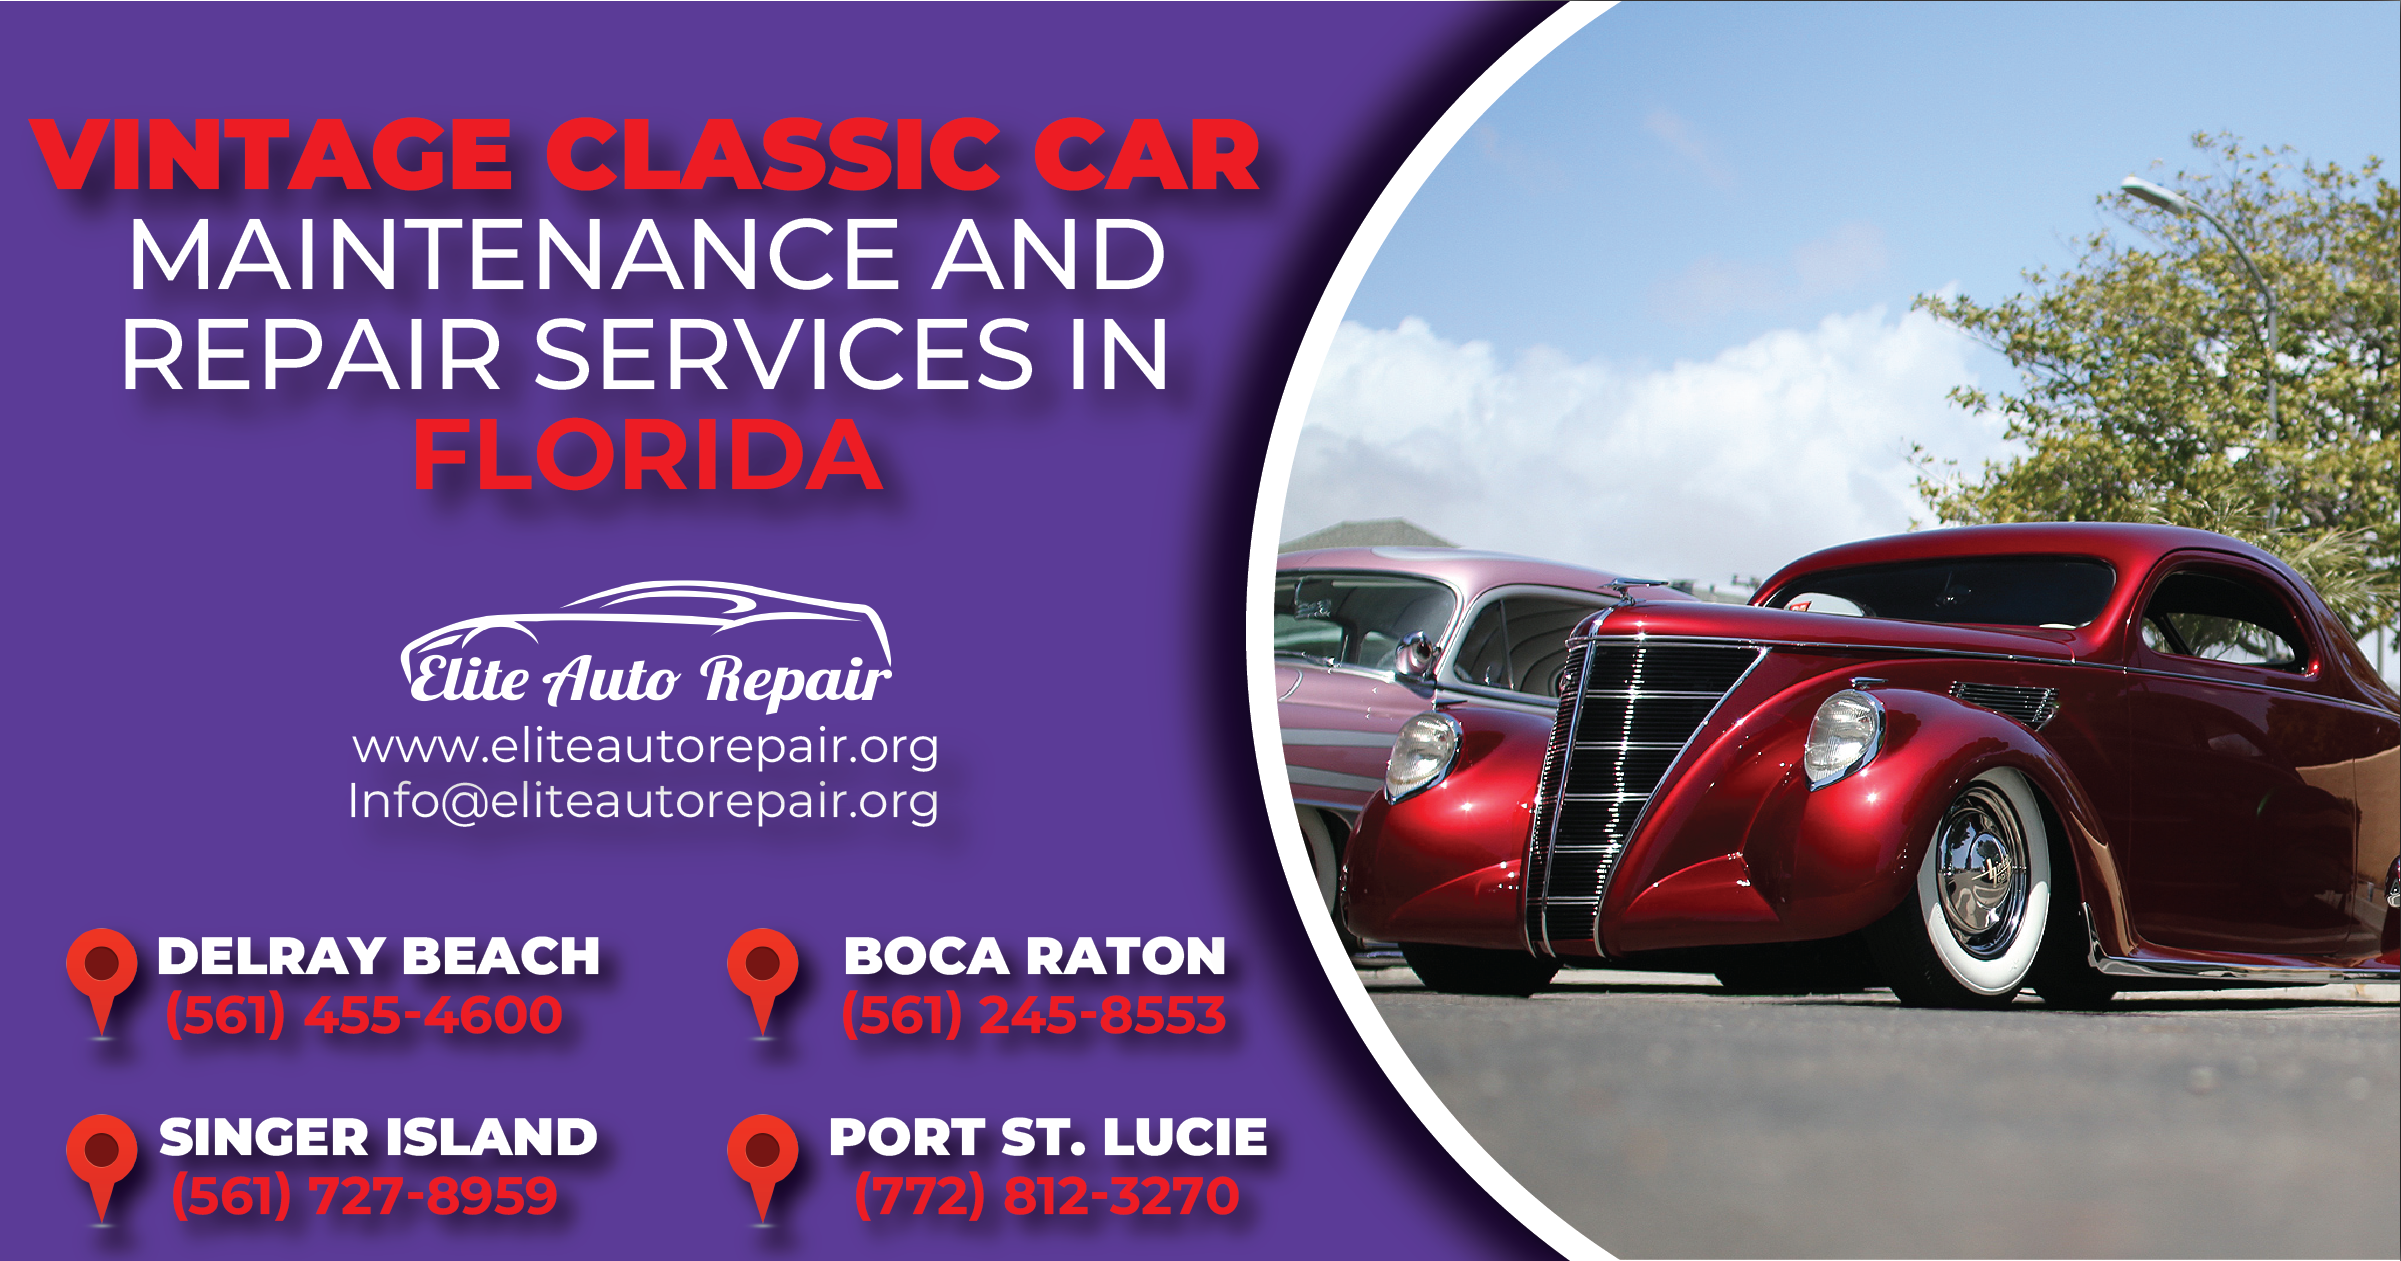 Vintage Classic Car Maintenance and Repair Services in Florida